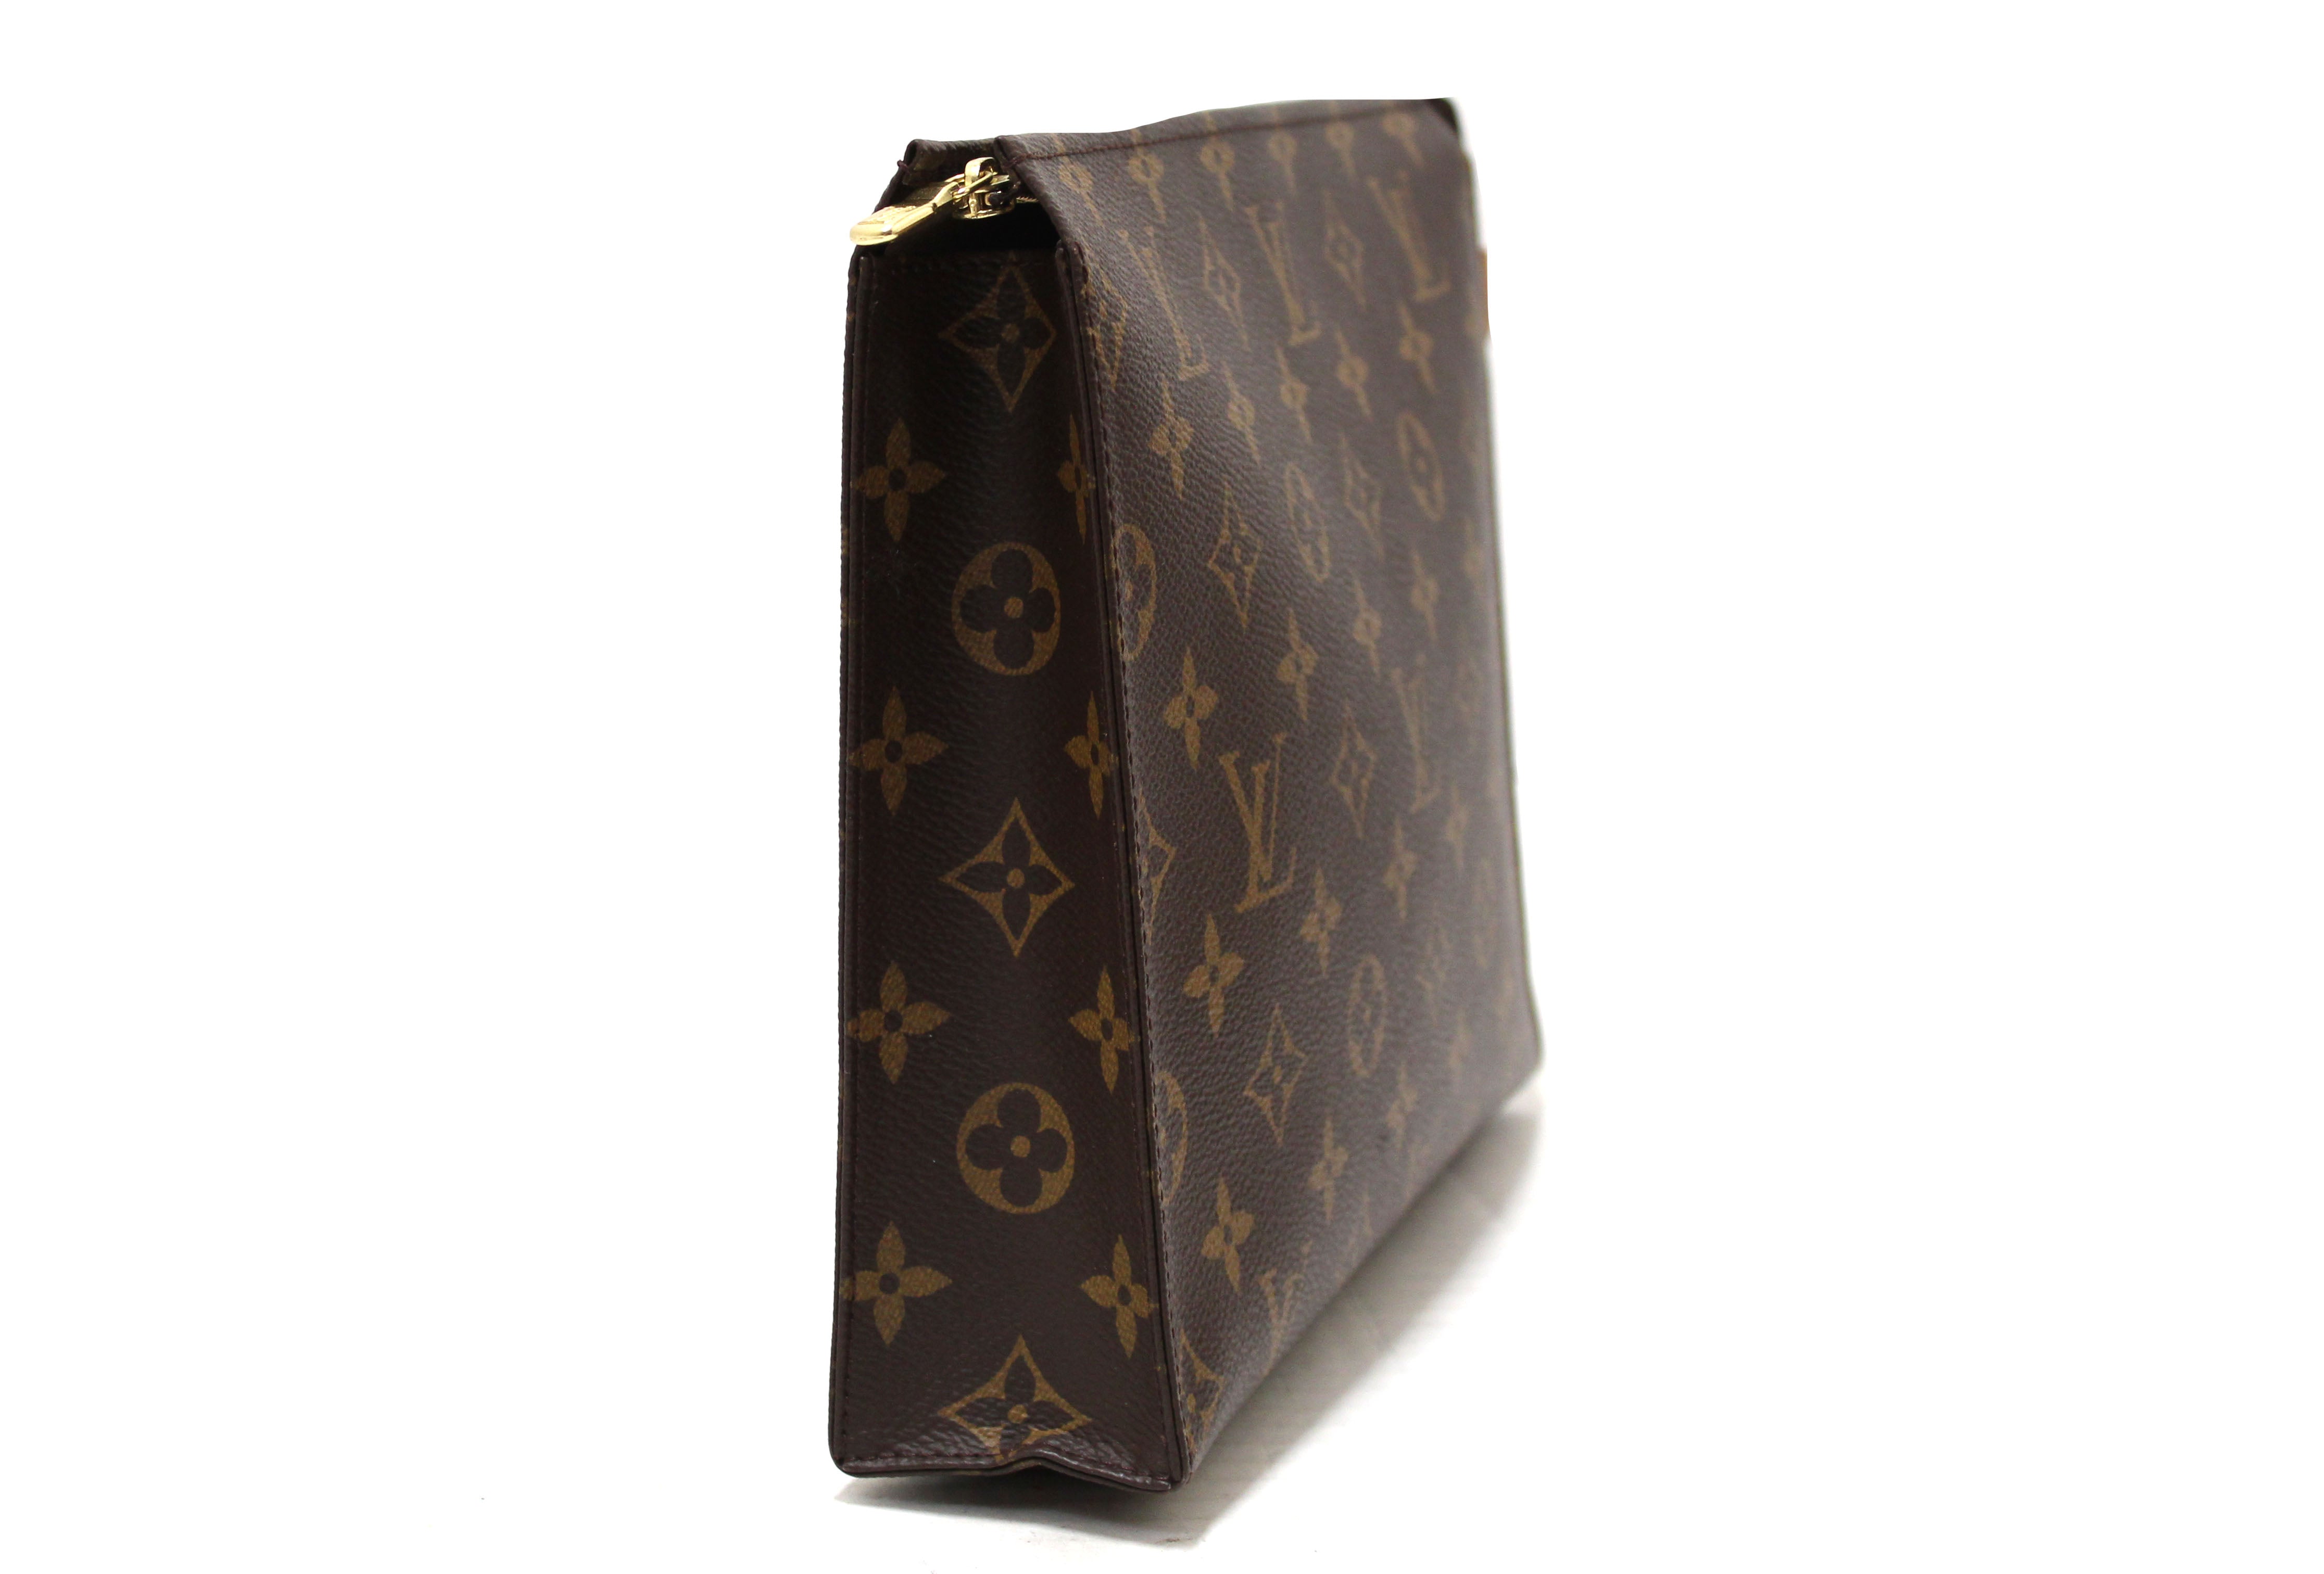 Shop Louis Vuitton MONOGRAM Toiletry pouch 26 (M47542) by inthewall